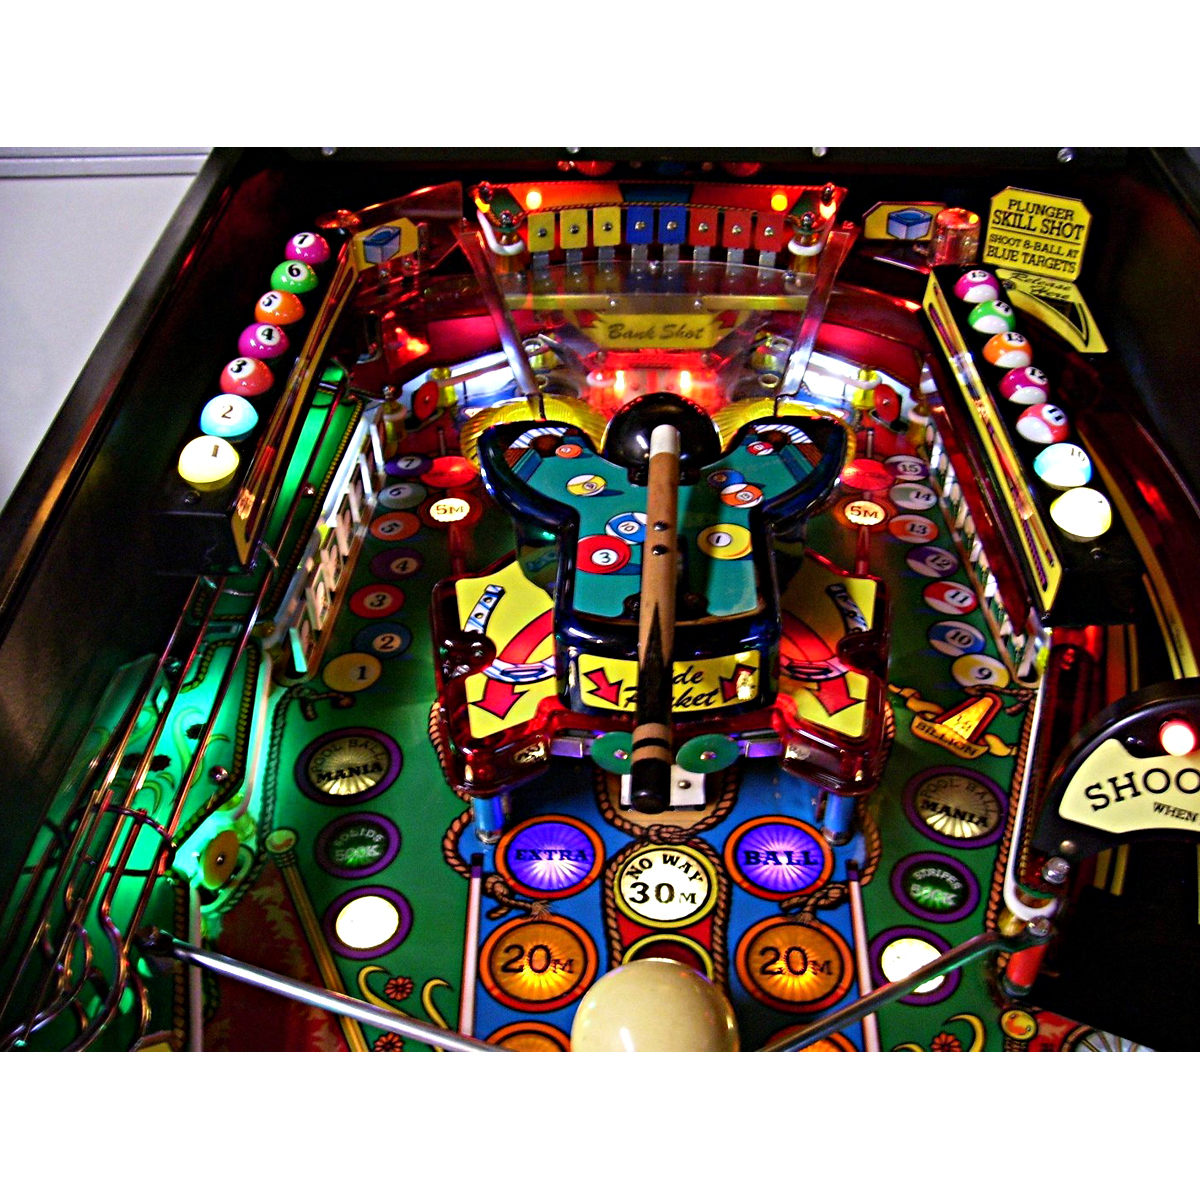 Search results for: 'the-who-pinball-wizard-119168' in 2023